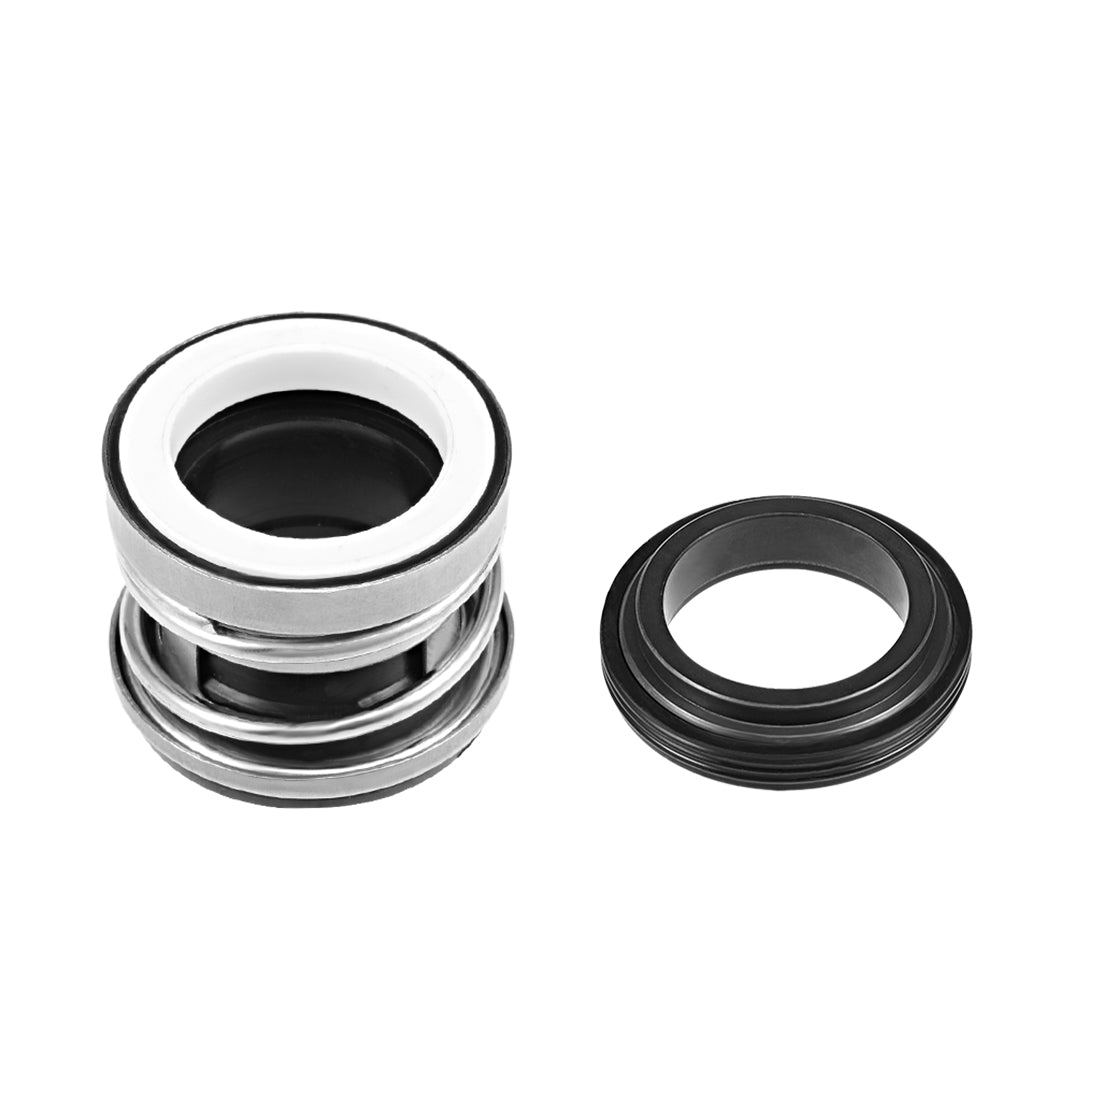 uxcell Uxcell Mechanical Shaft Seal Replacement for Pool Spa Pump 104-25